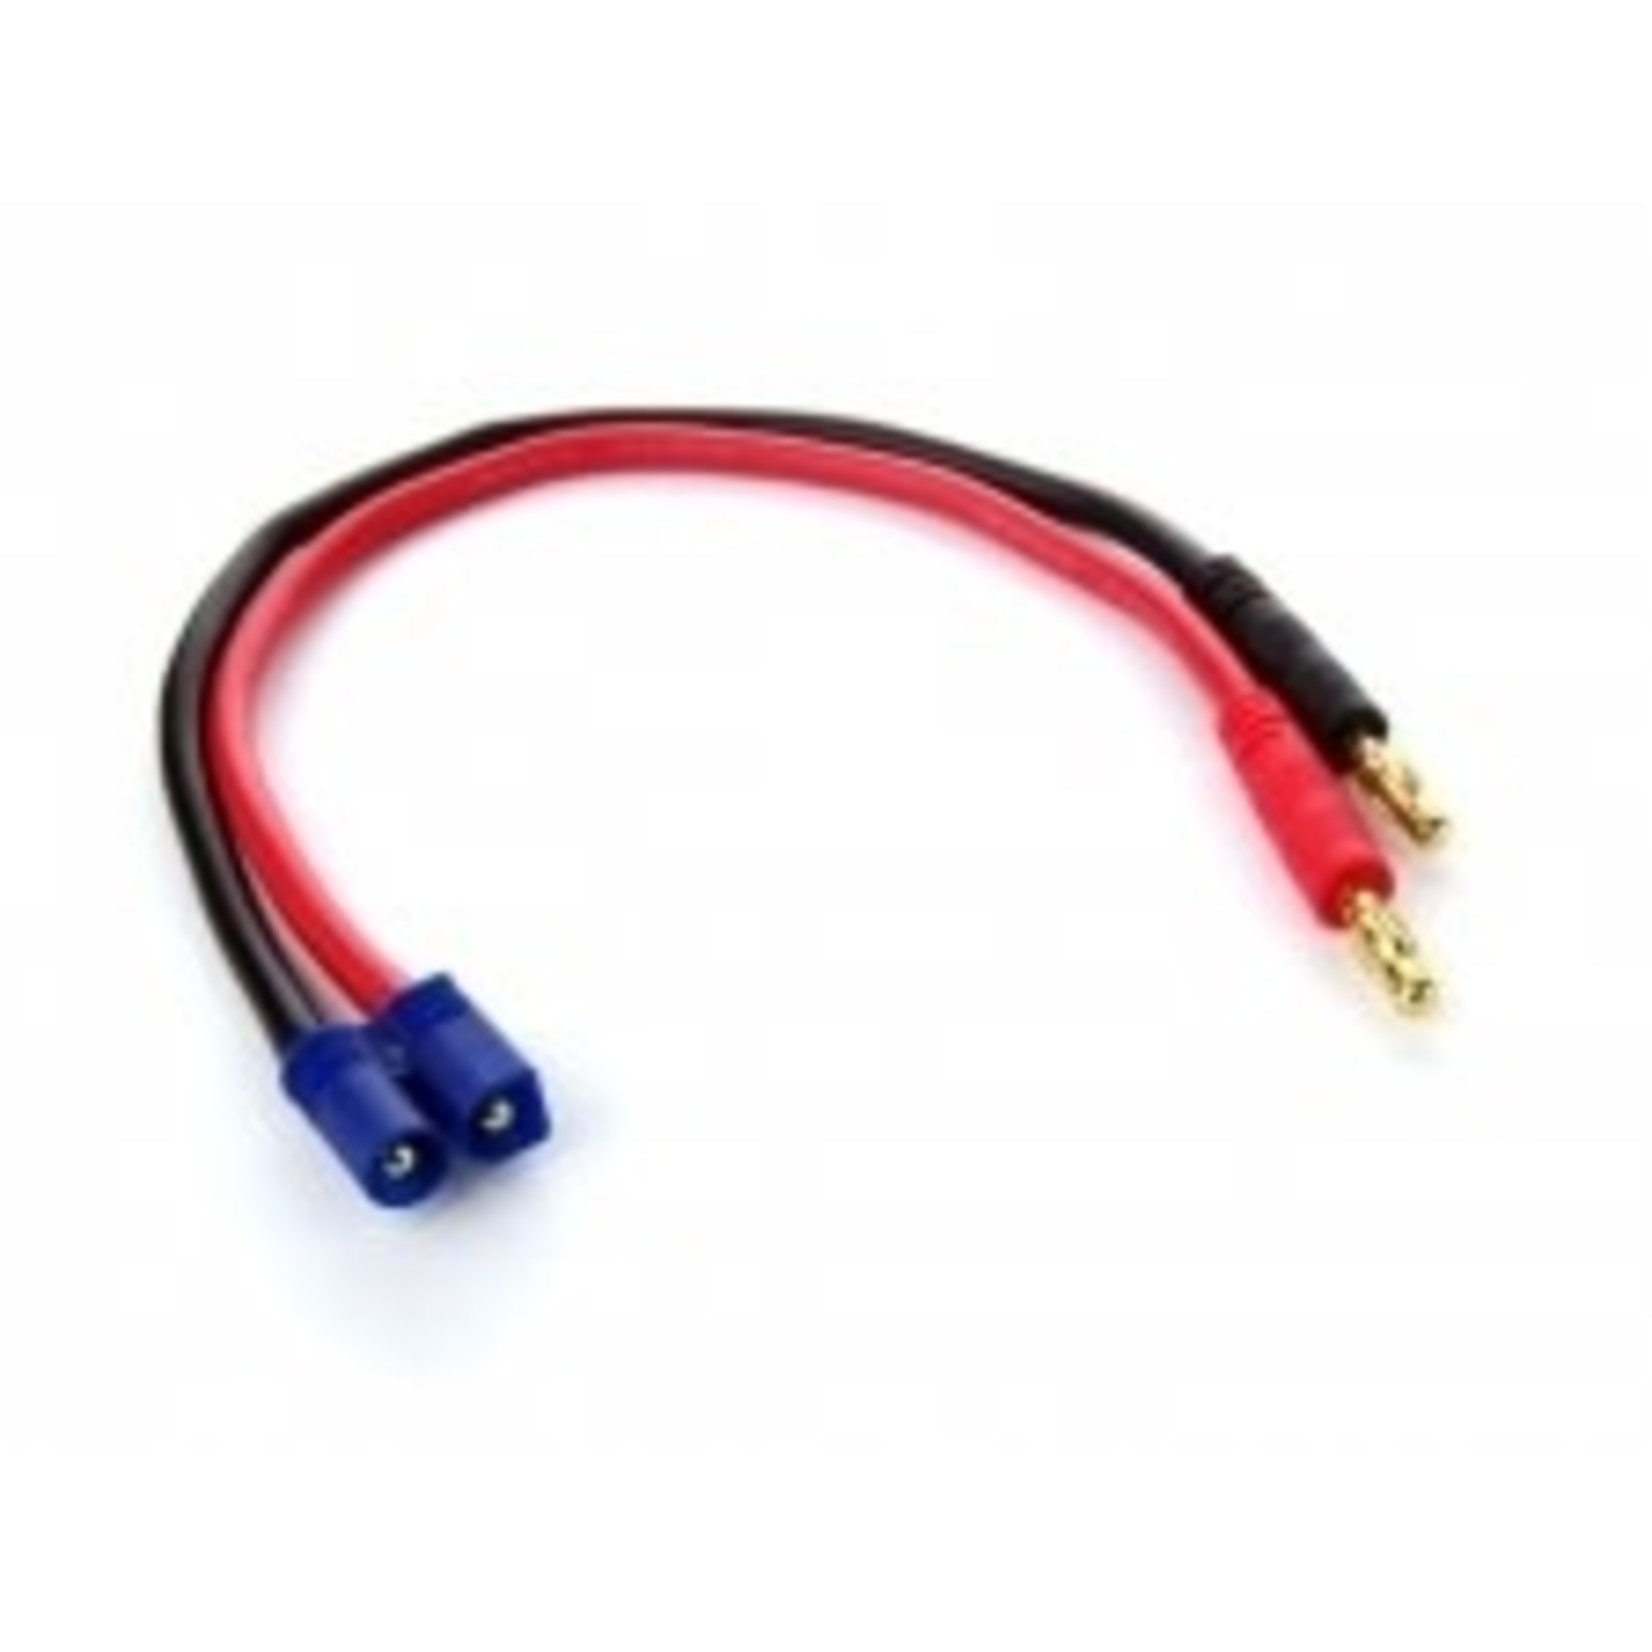 Common Sense RC Lectron Pro EC3 Charge Lead with Banana Plugs